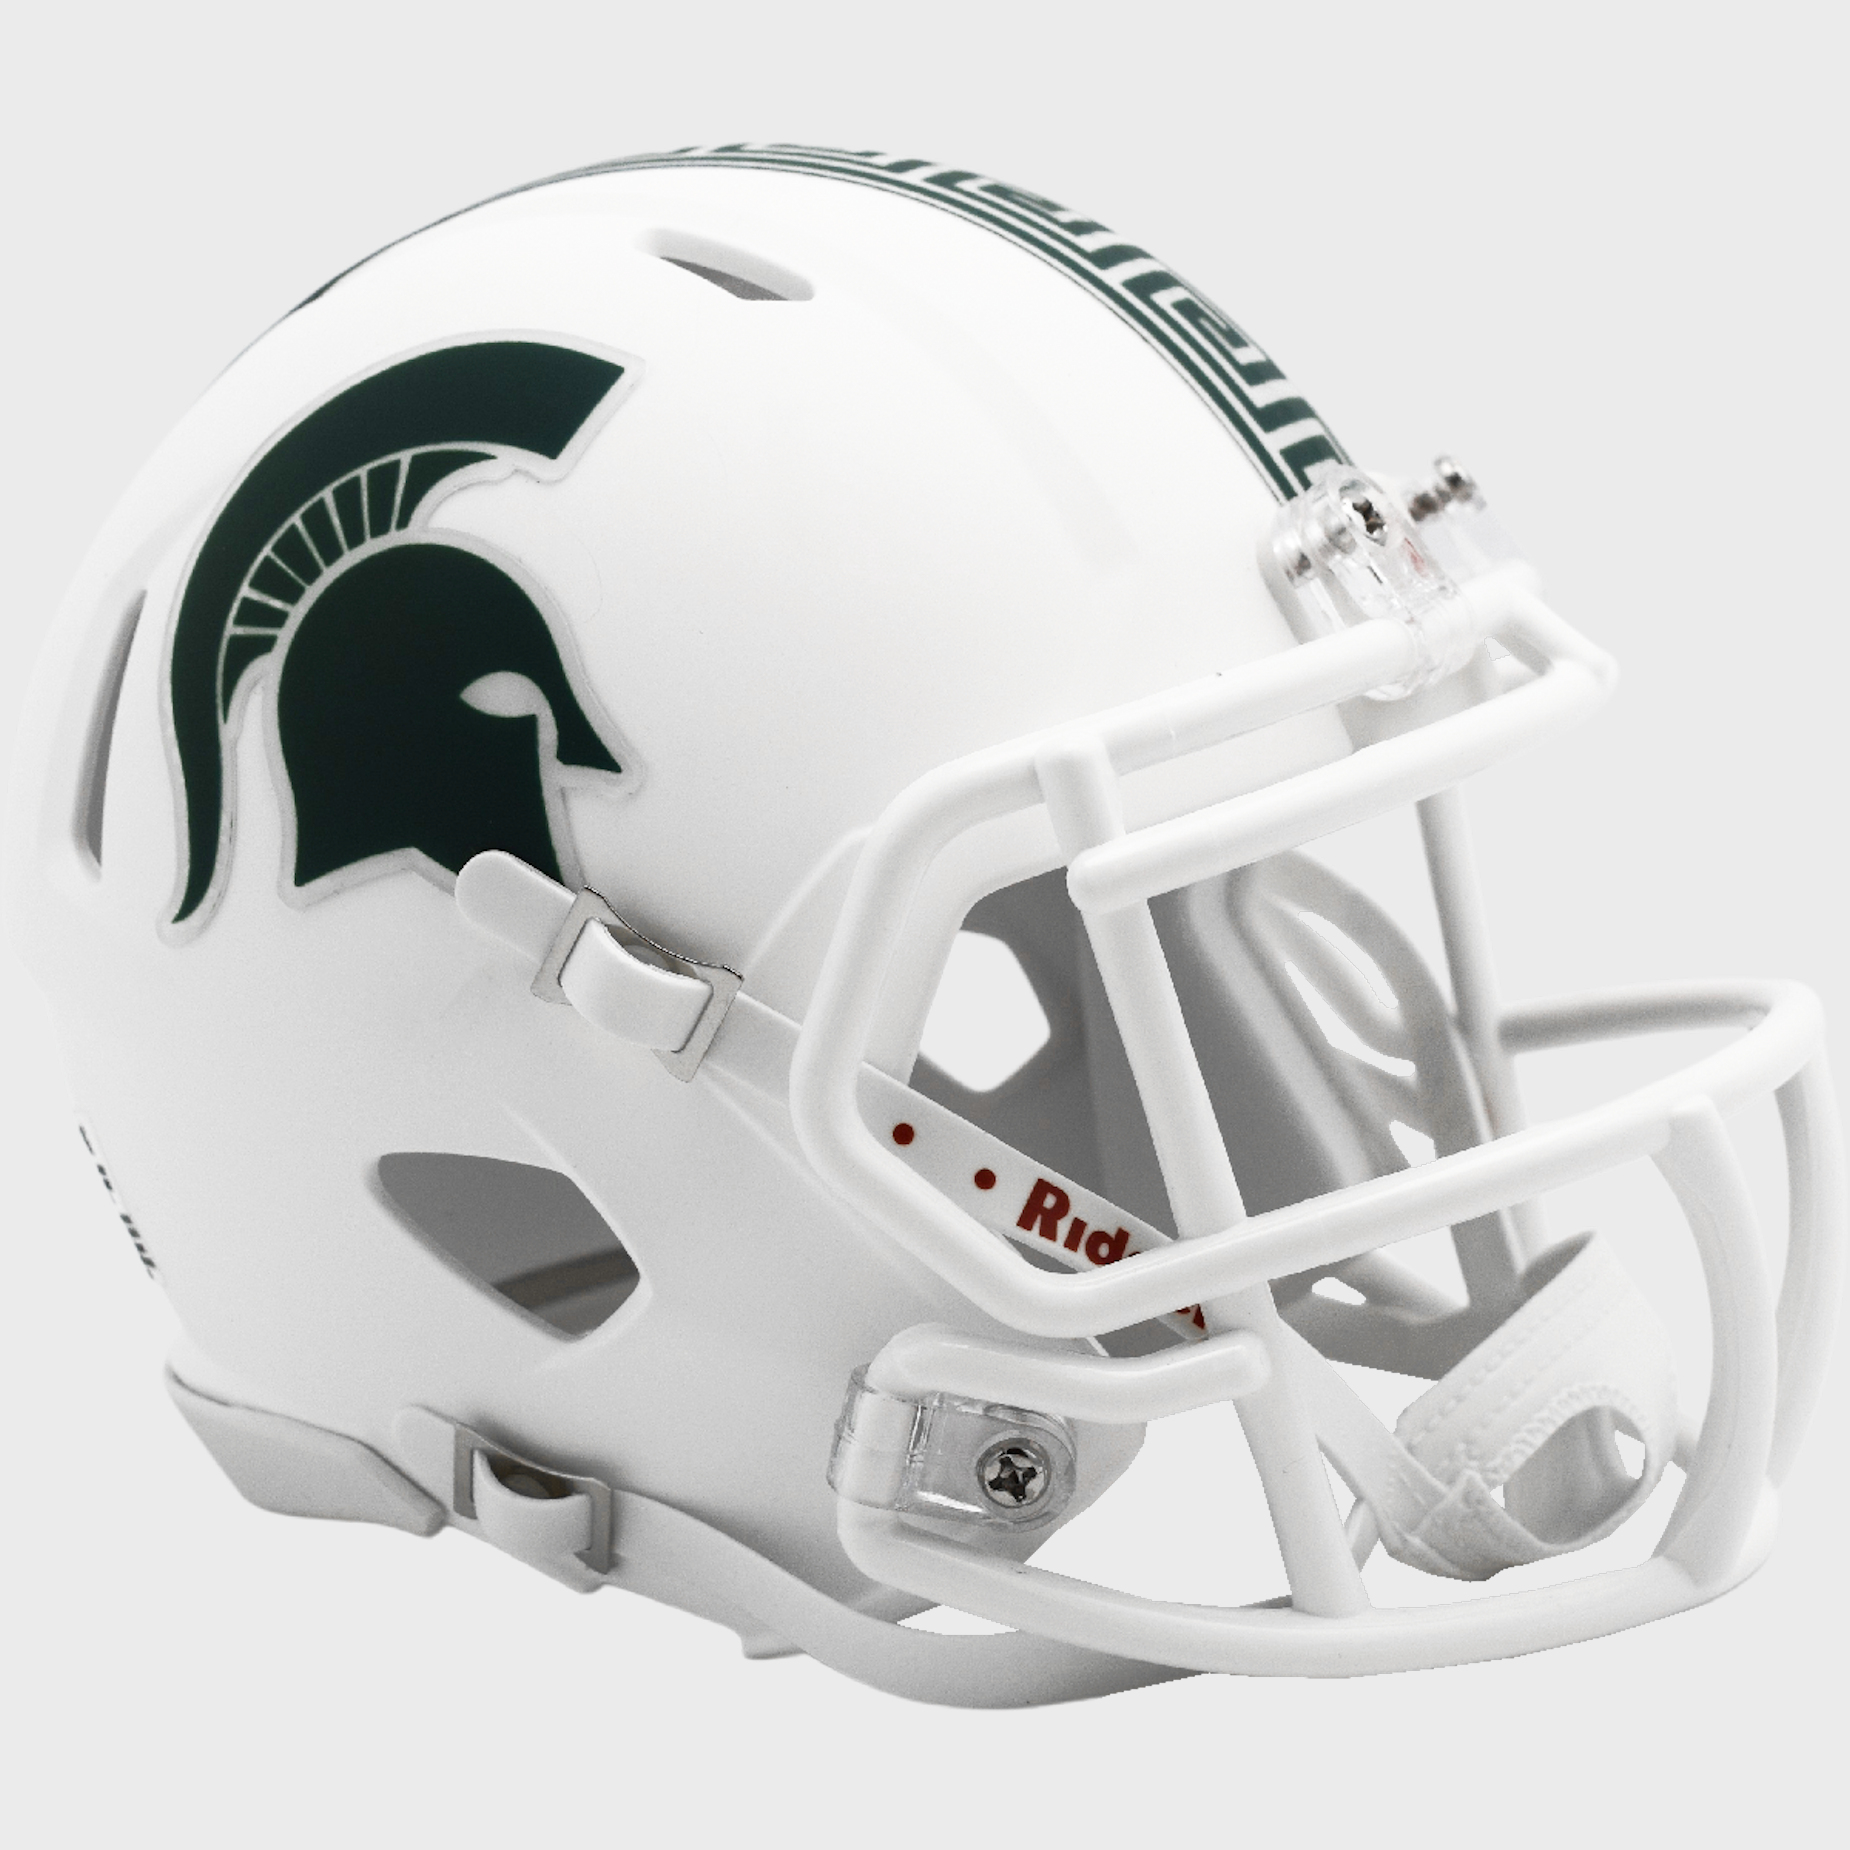 Michigan State Spartans authentic full size helmet